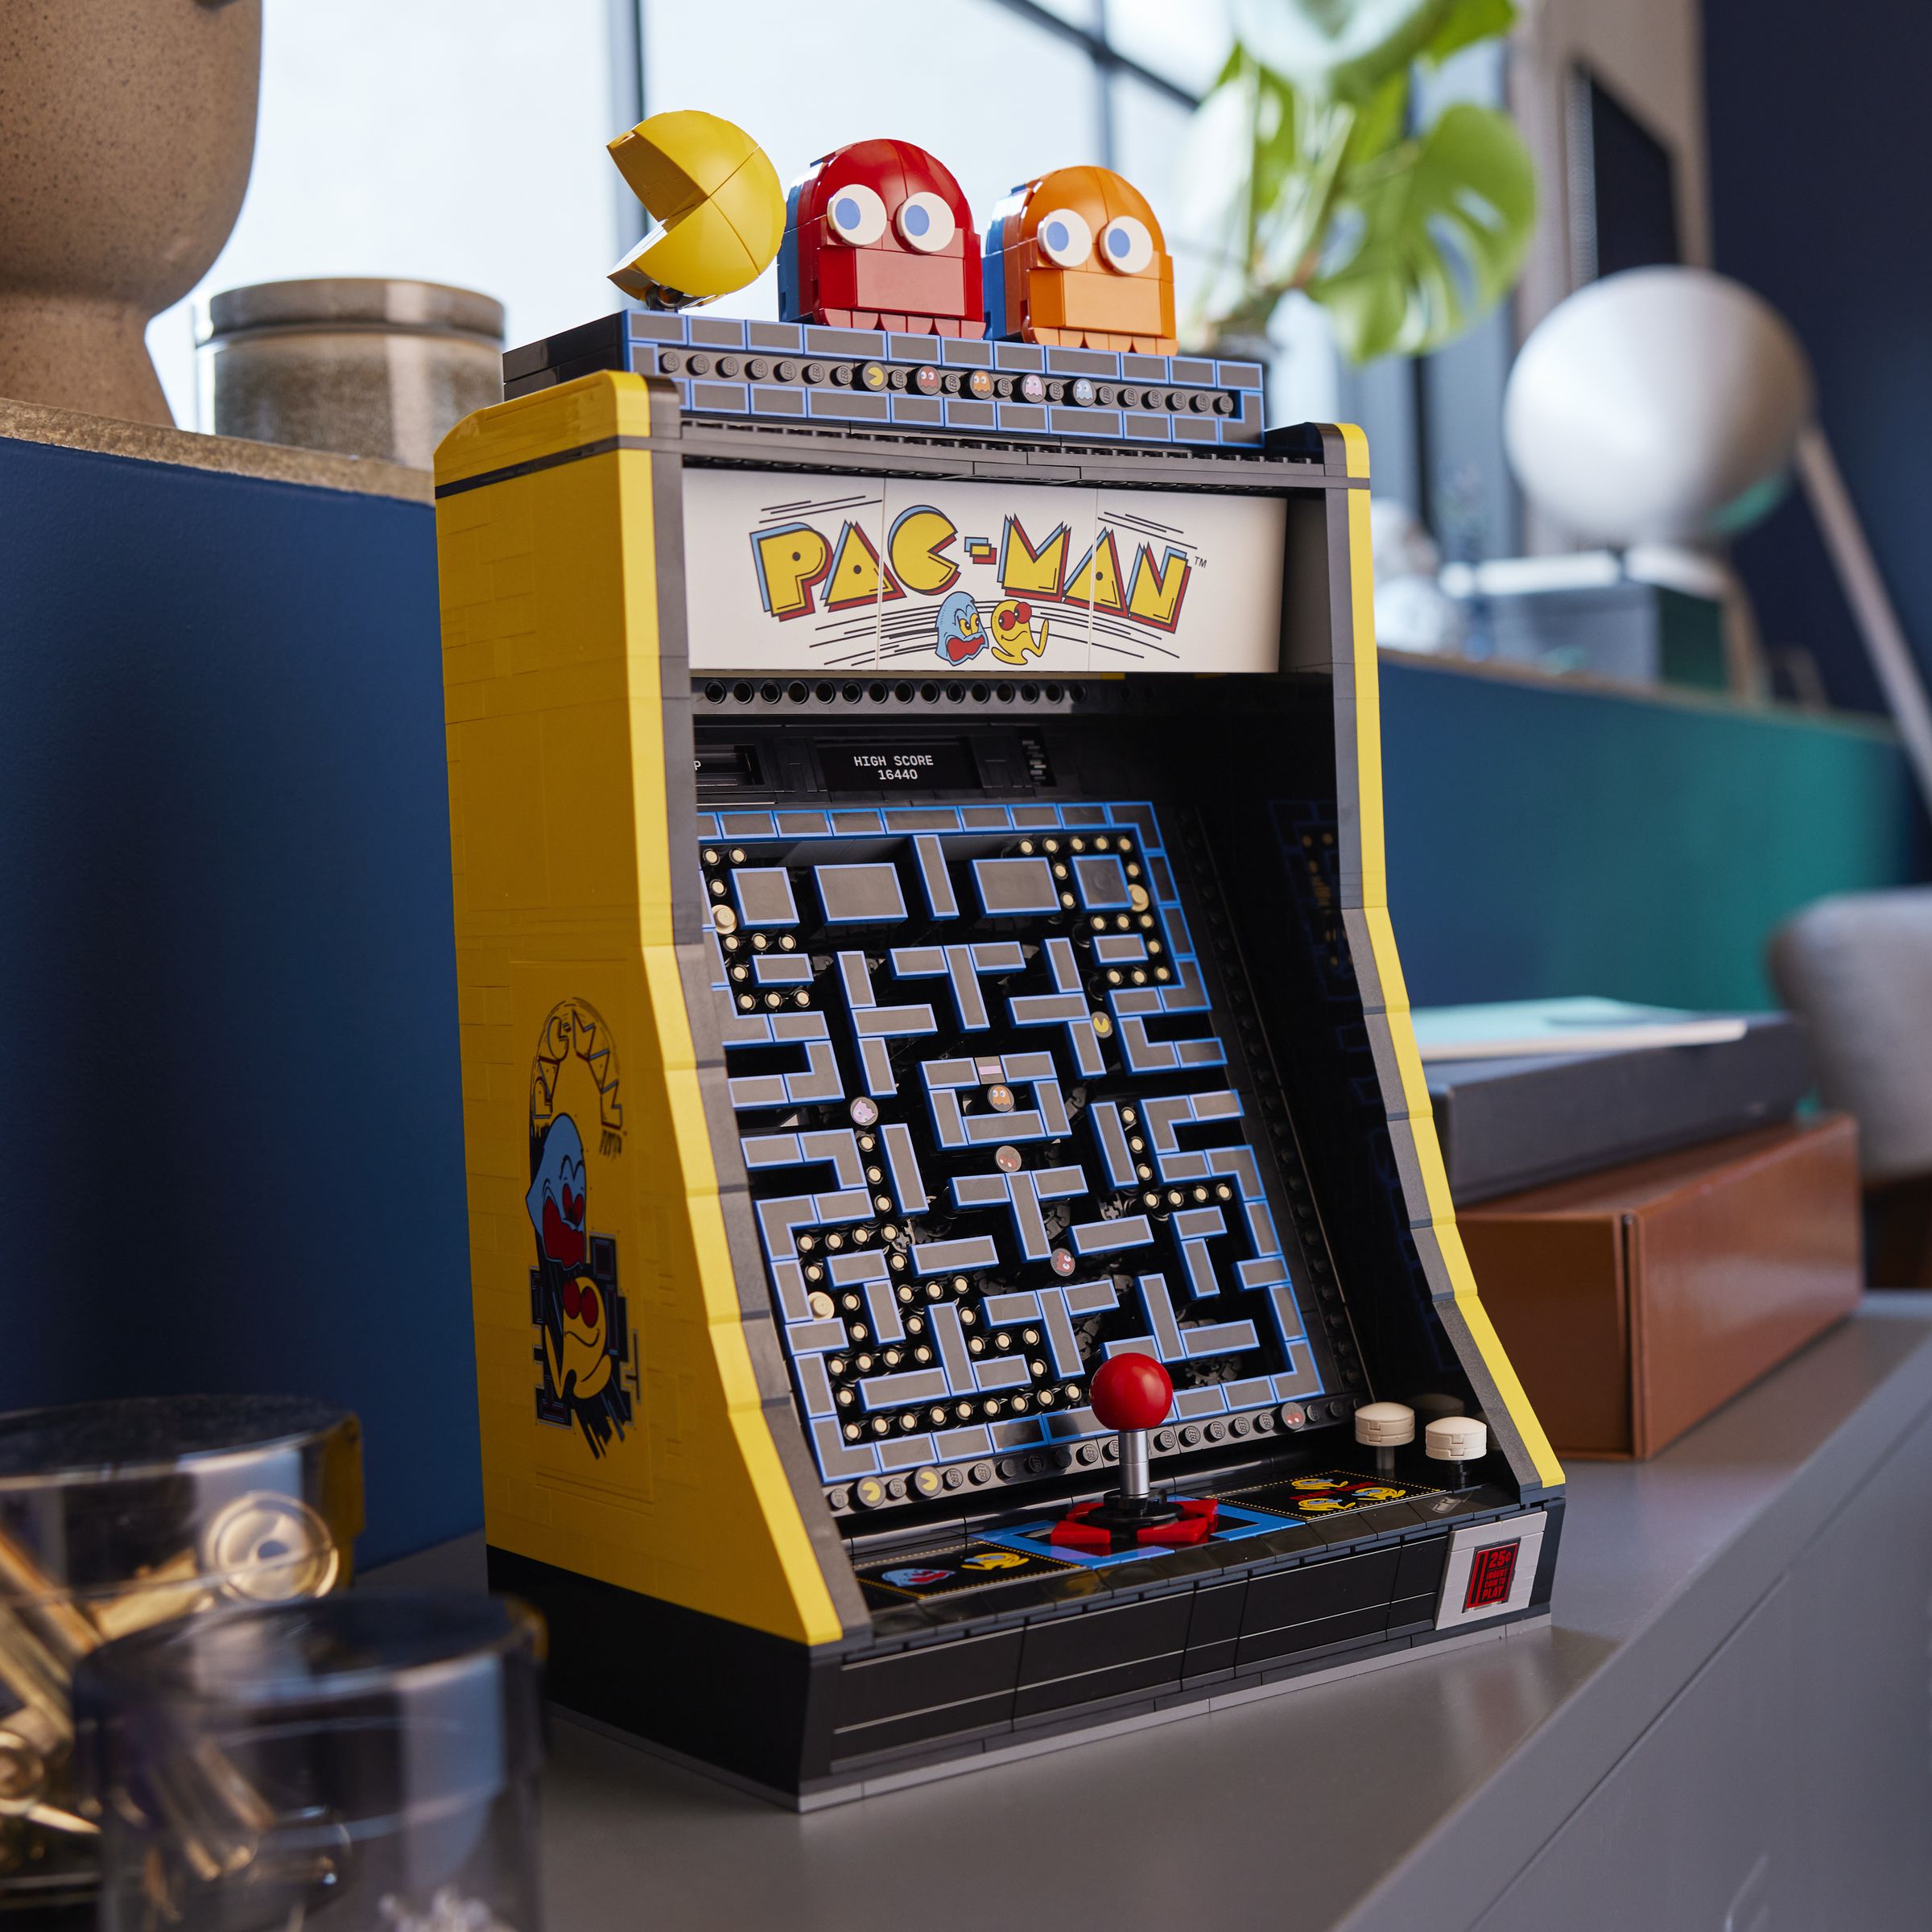 A lego pac-man arcade cabinet in a busy room.